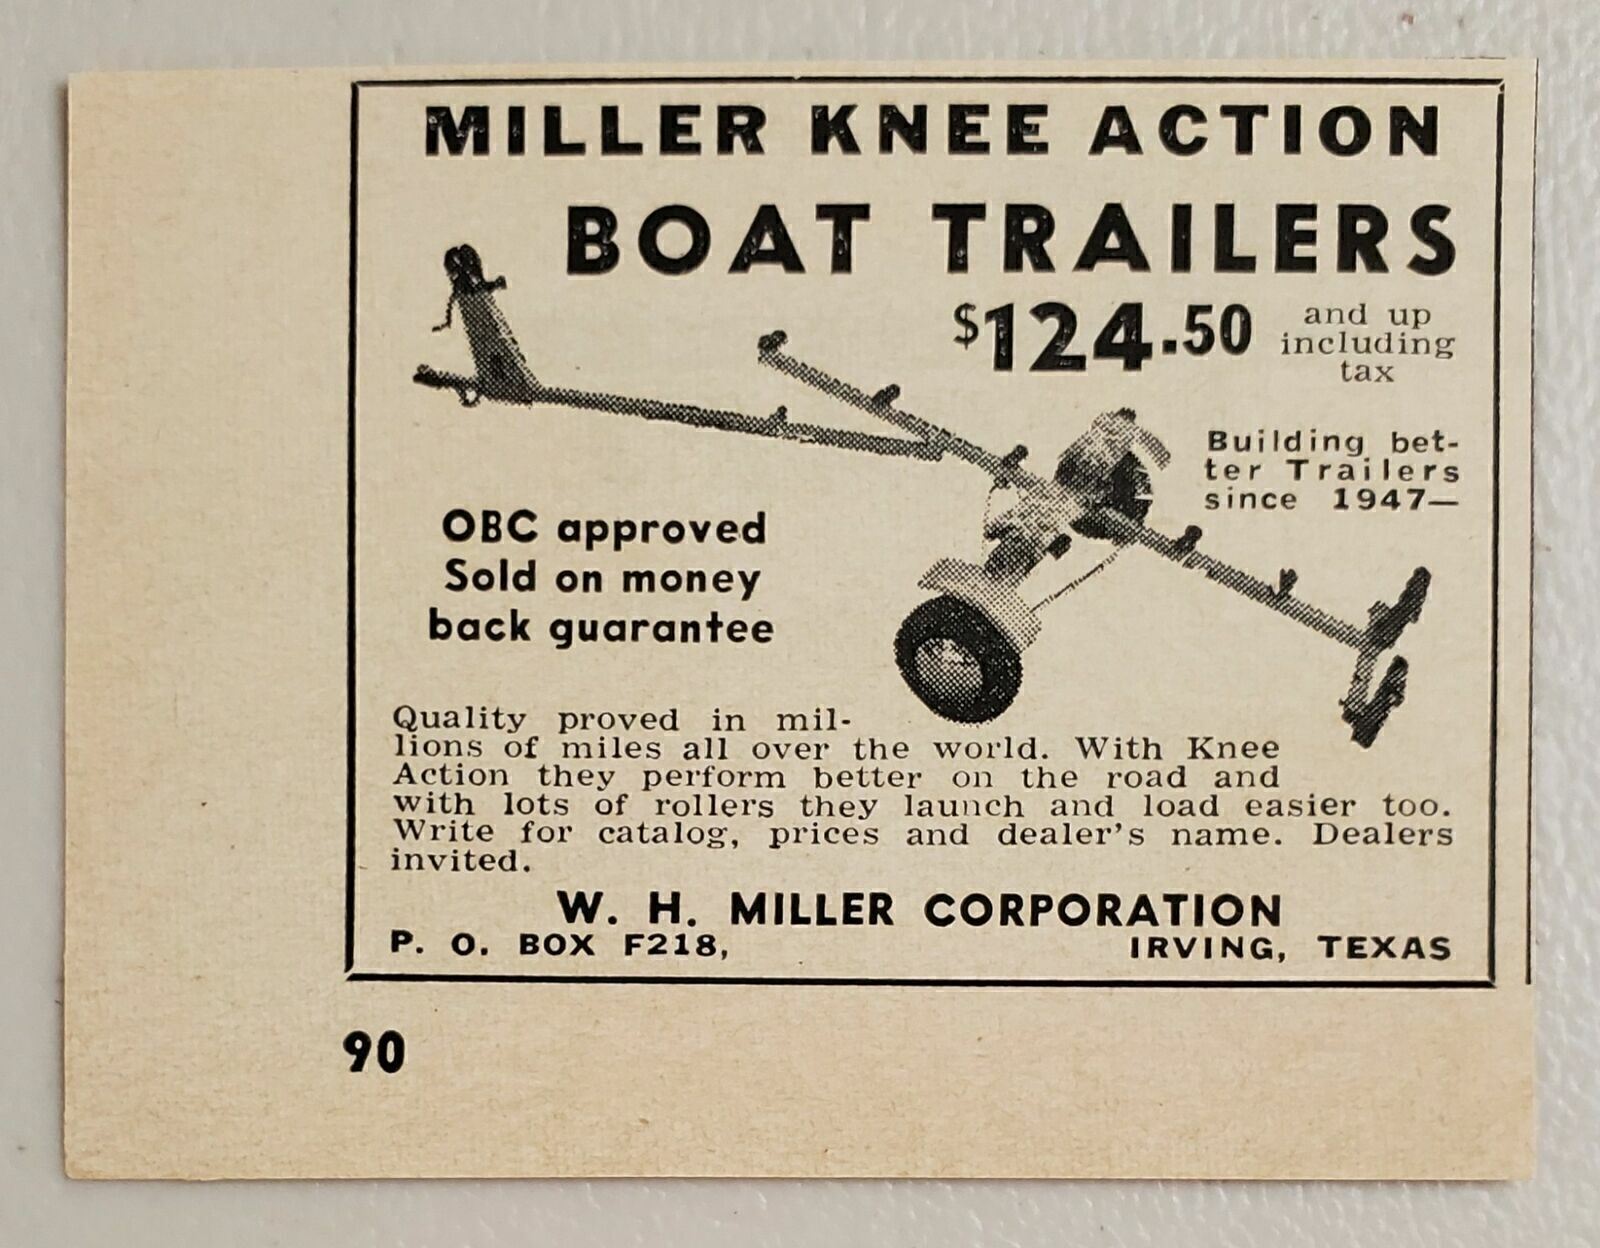 1957 Print Ad Miller Knee Action Boat Trailers Made in Irving,Texas